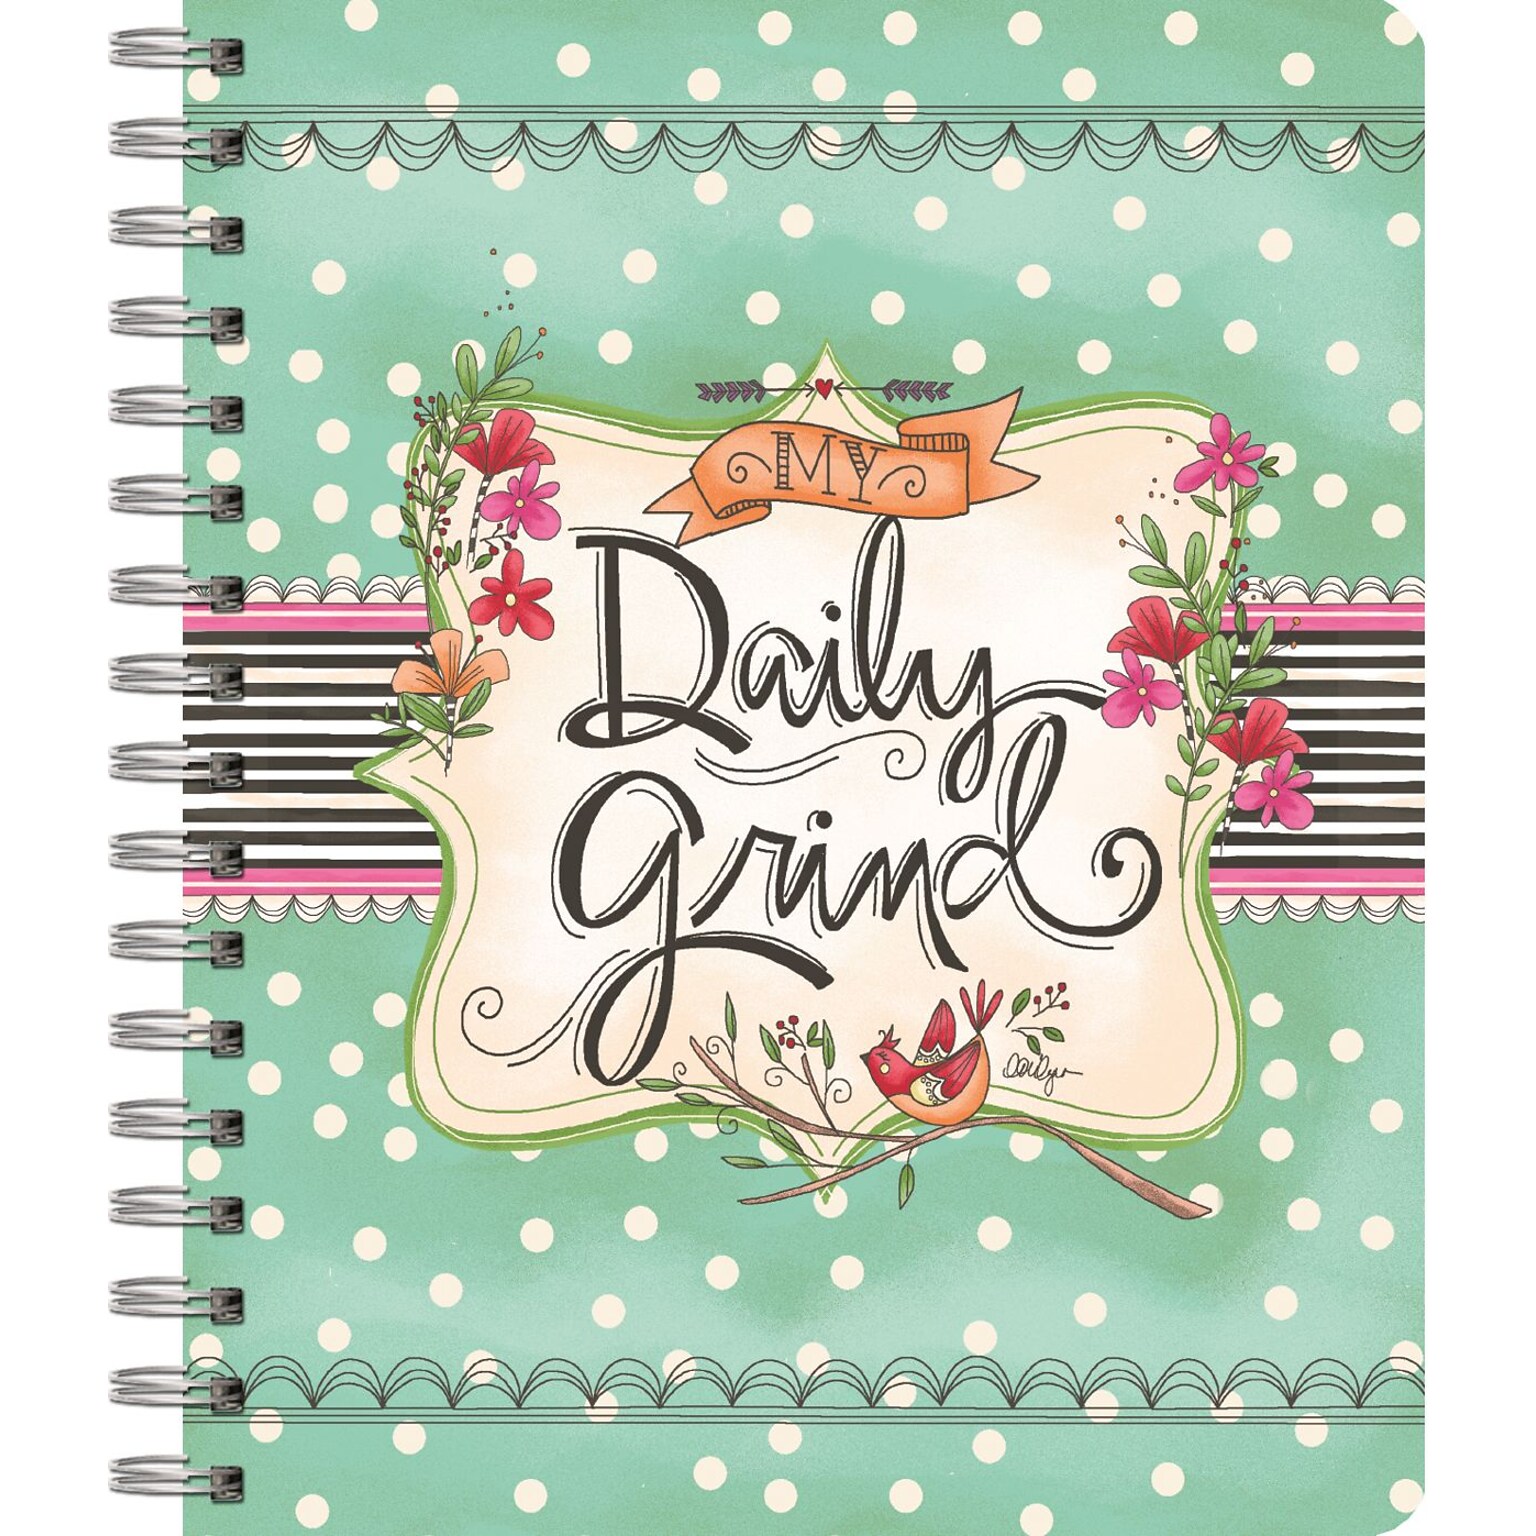 Lang Daily Grind 7 x 9 Creative Weekly & Monthly Planner (1360001)